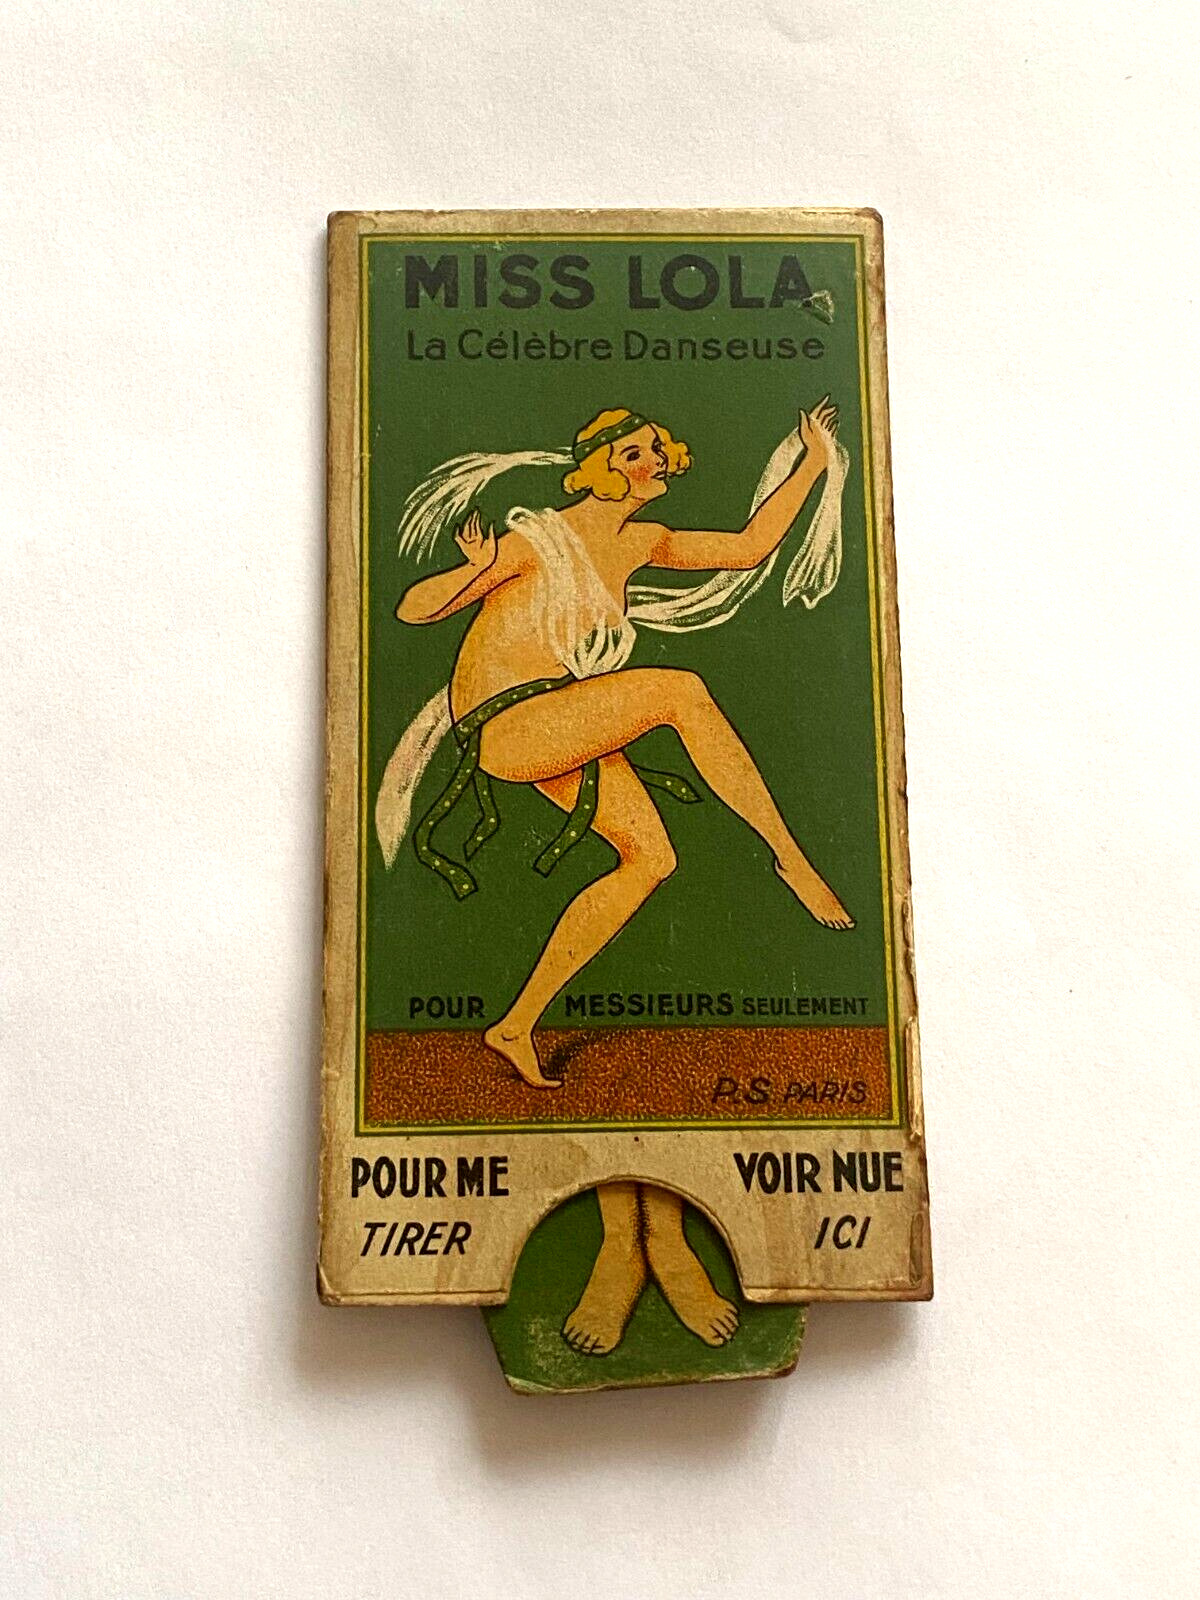 Vintage Rare MISS LOLA (The Famous Dancer) Comedy Piece made in France